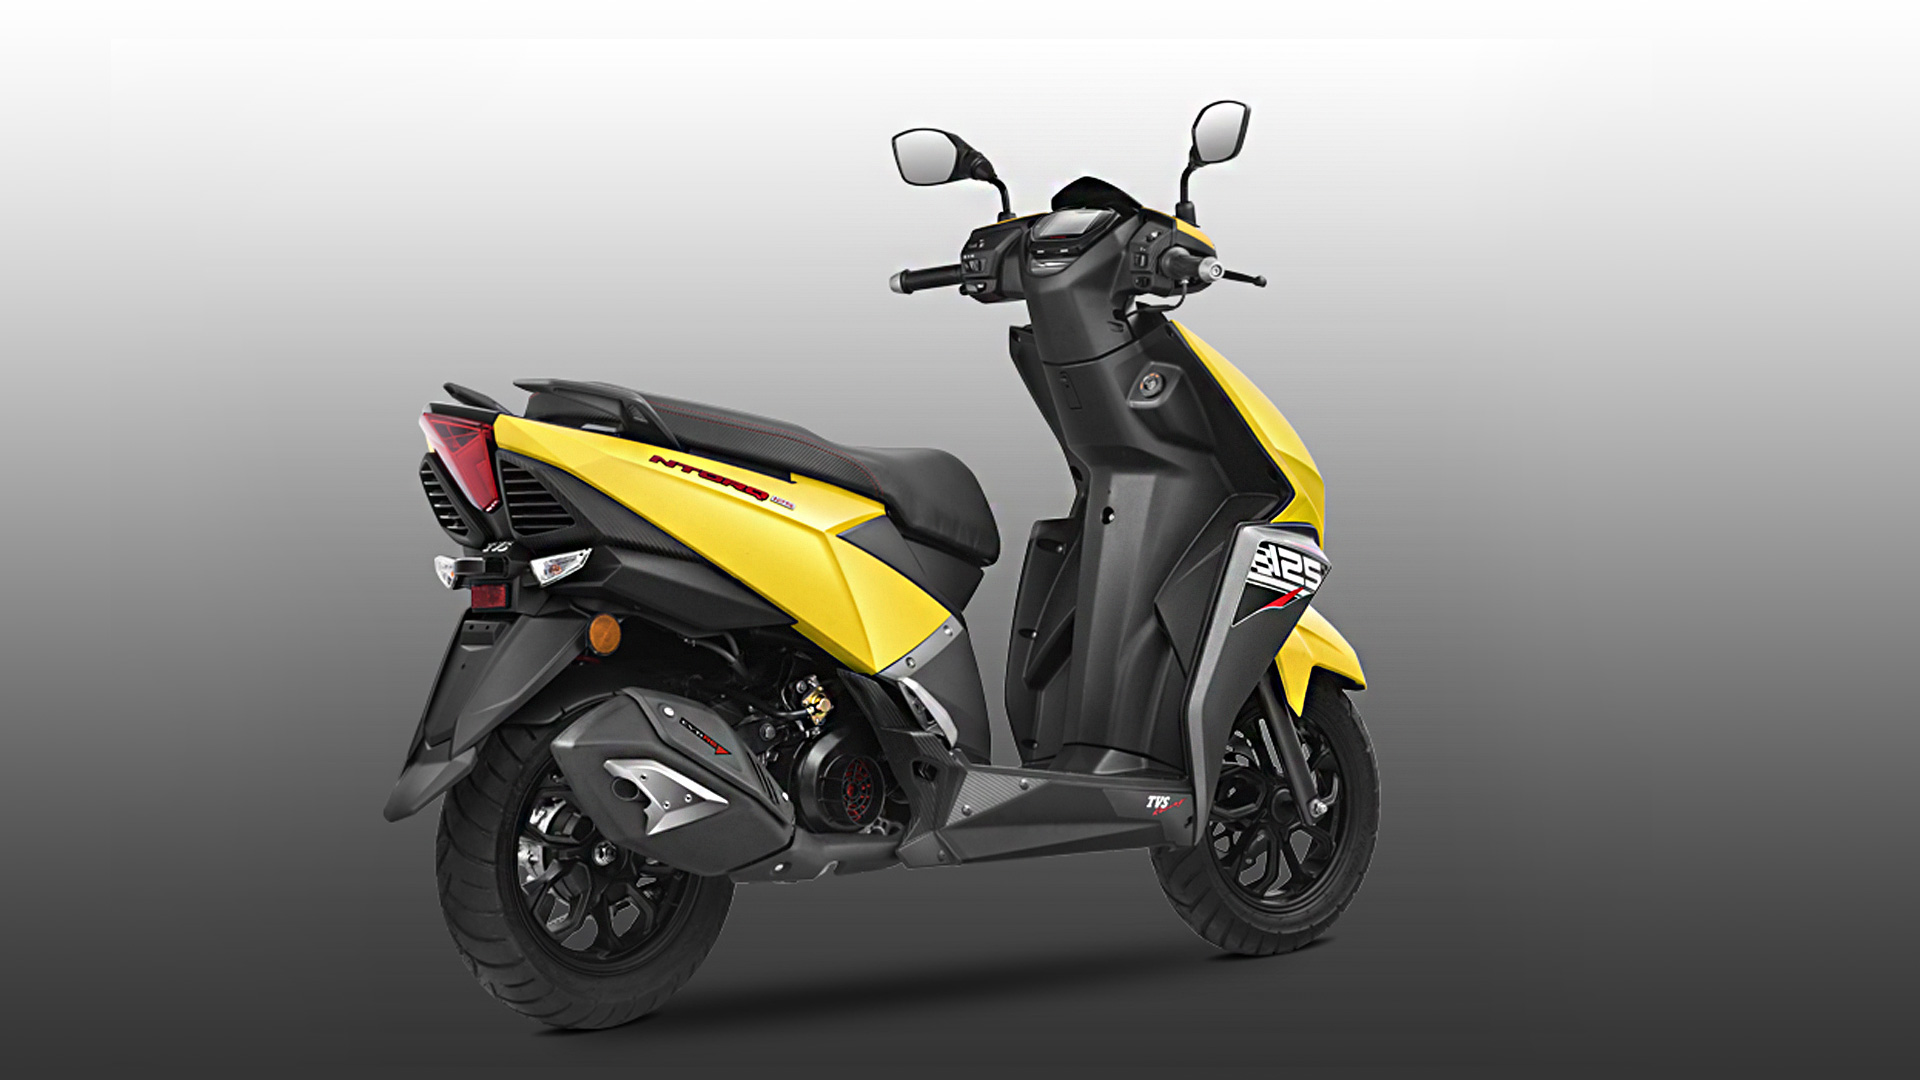 Tvs Ntorq 125 2020 Disc Price Mileage Reviews Specification